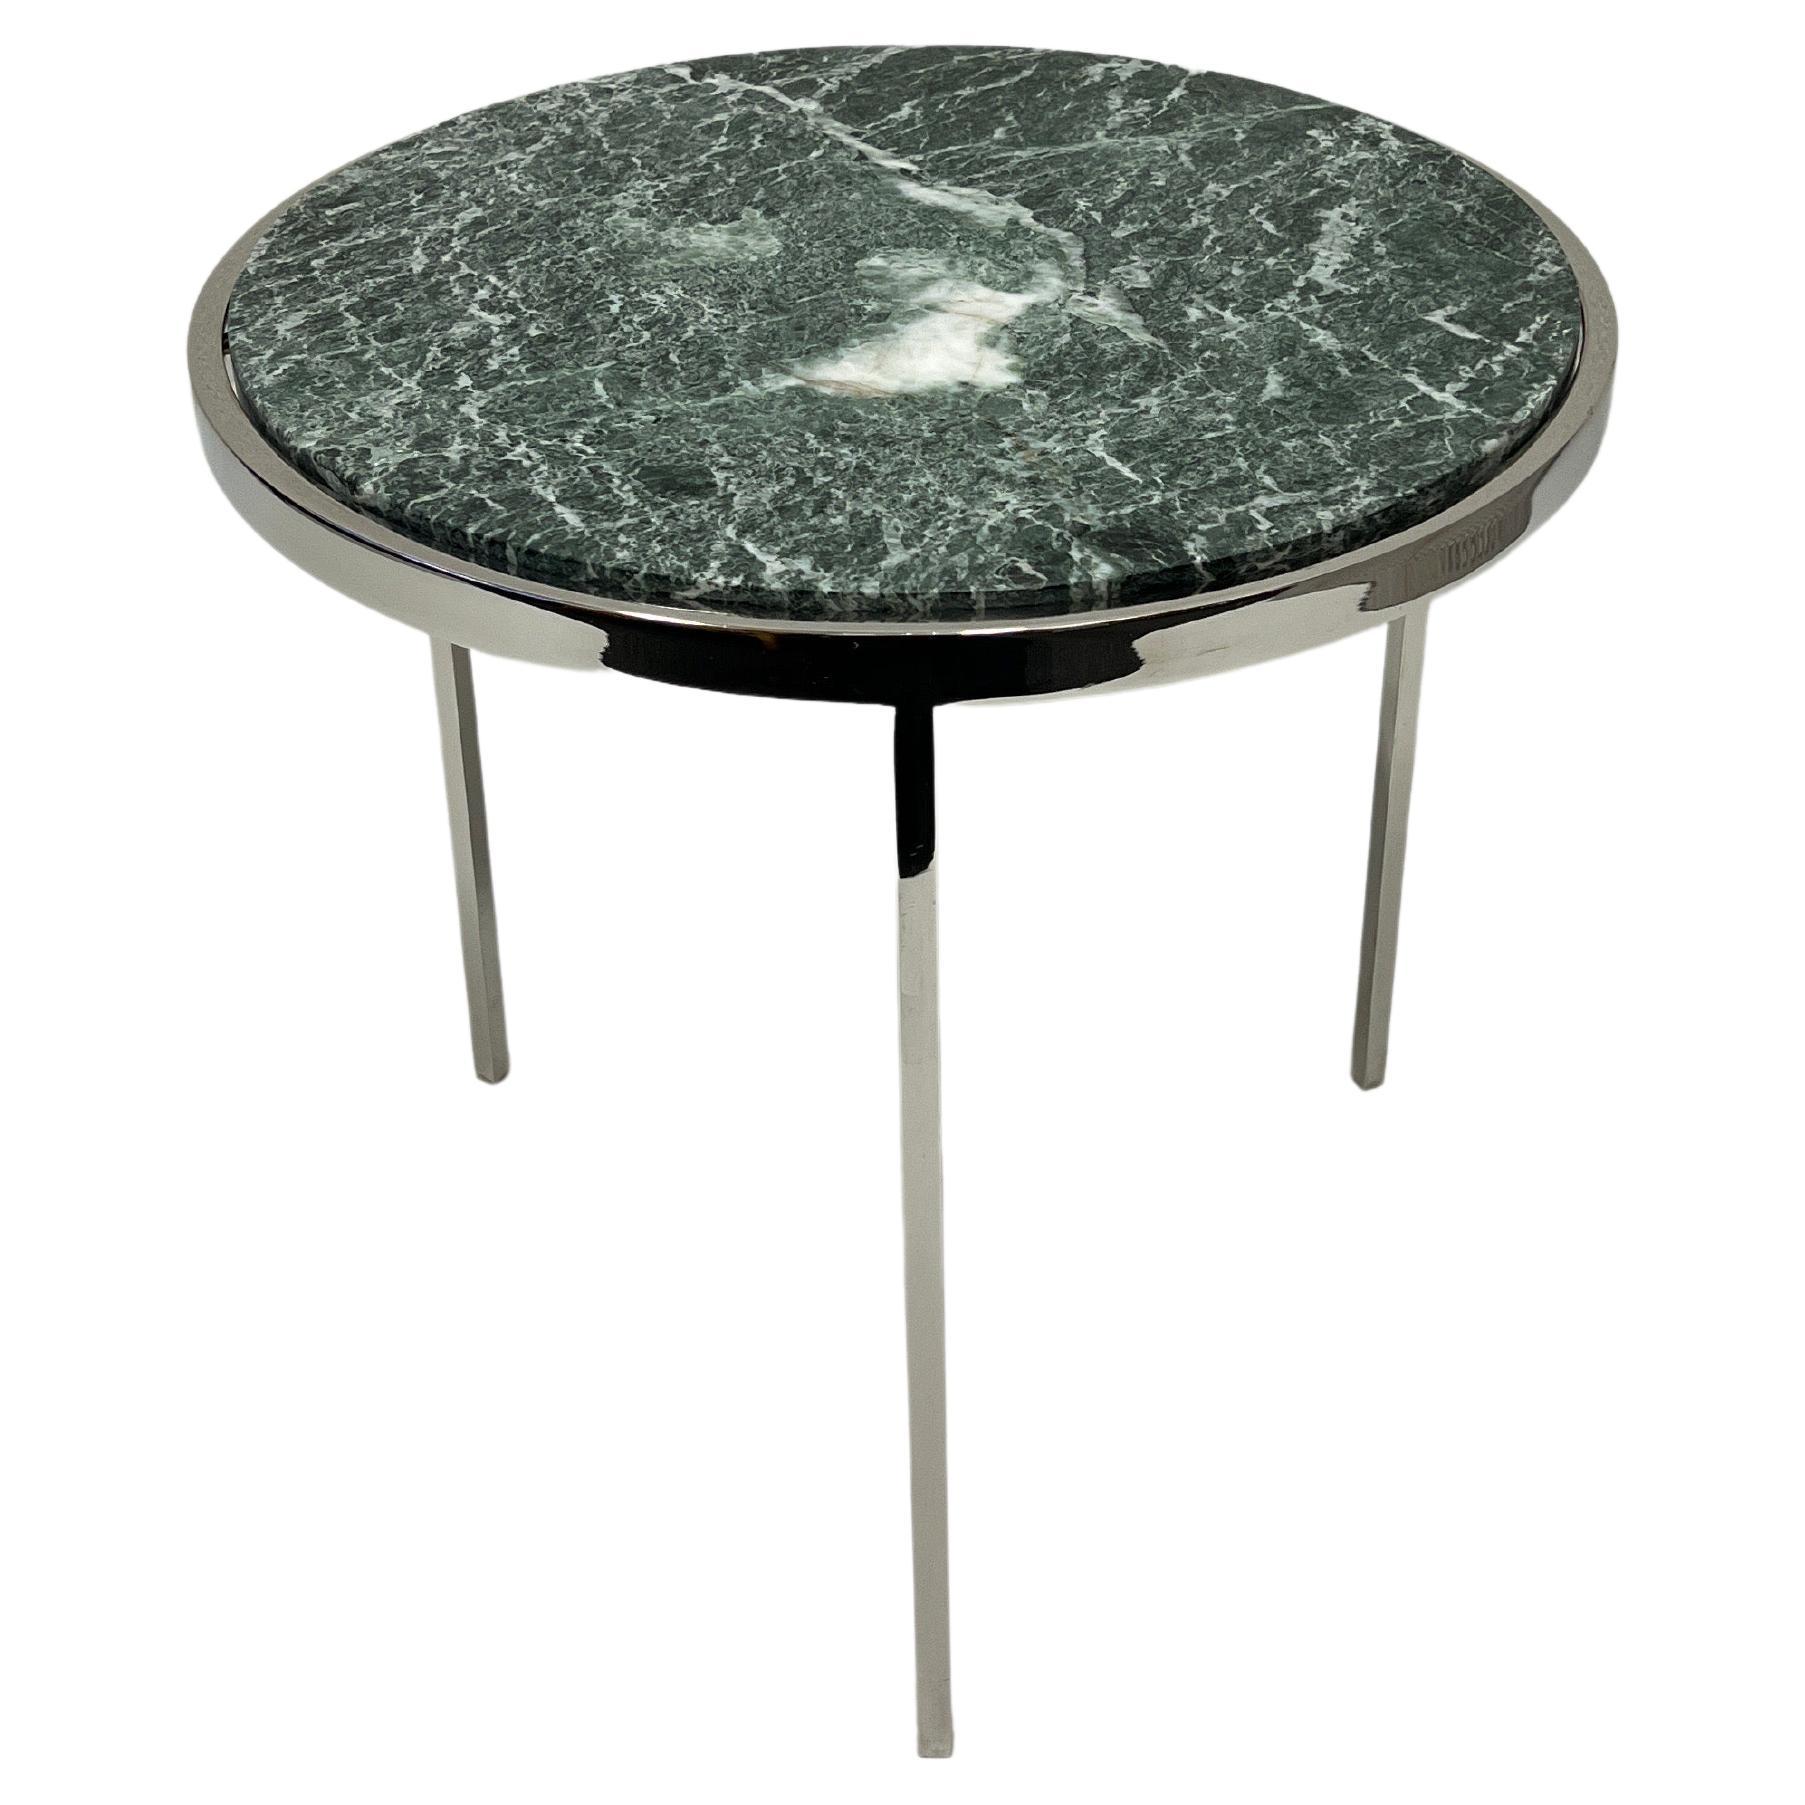 Green Marble and Polished Stainless Steel Round Tripod Side Table by Brueton  For Sale